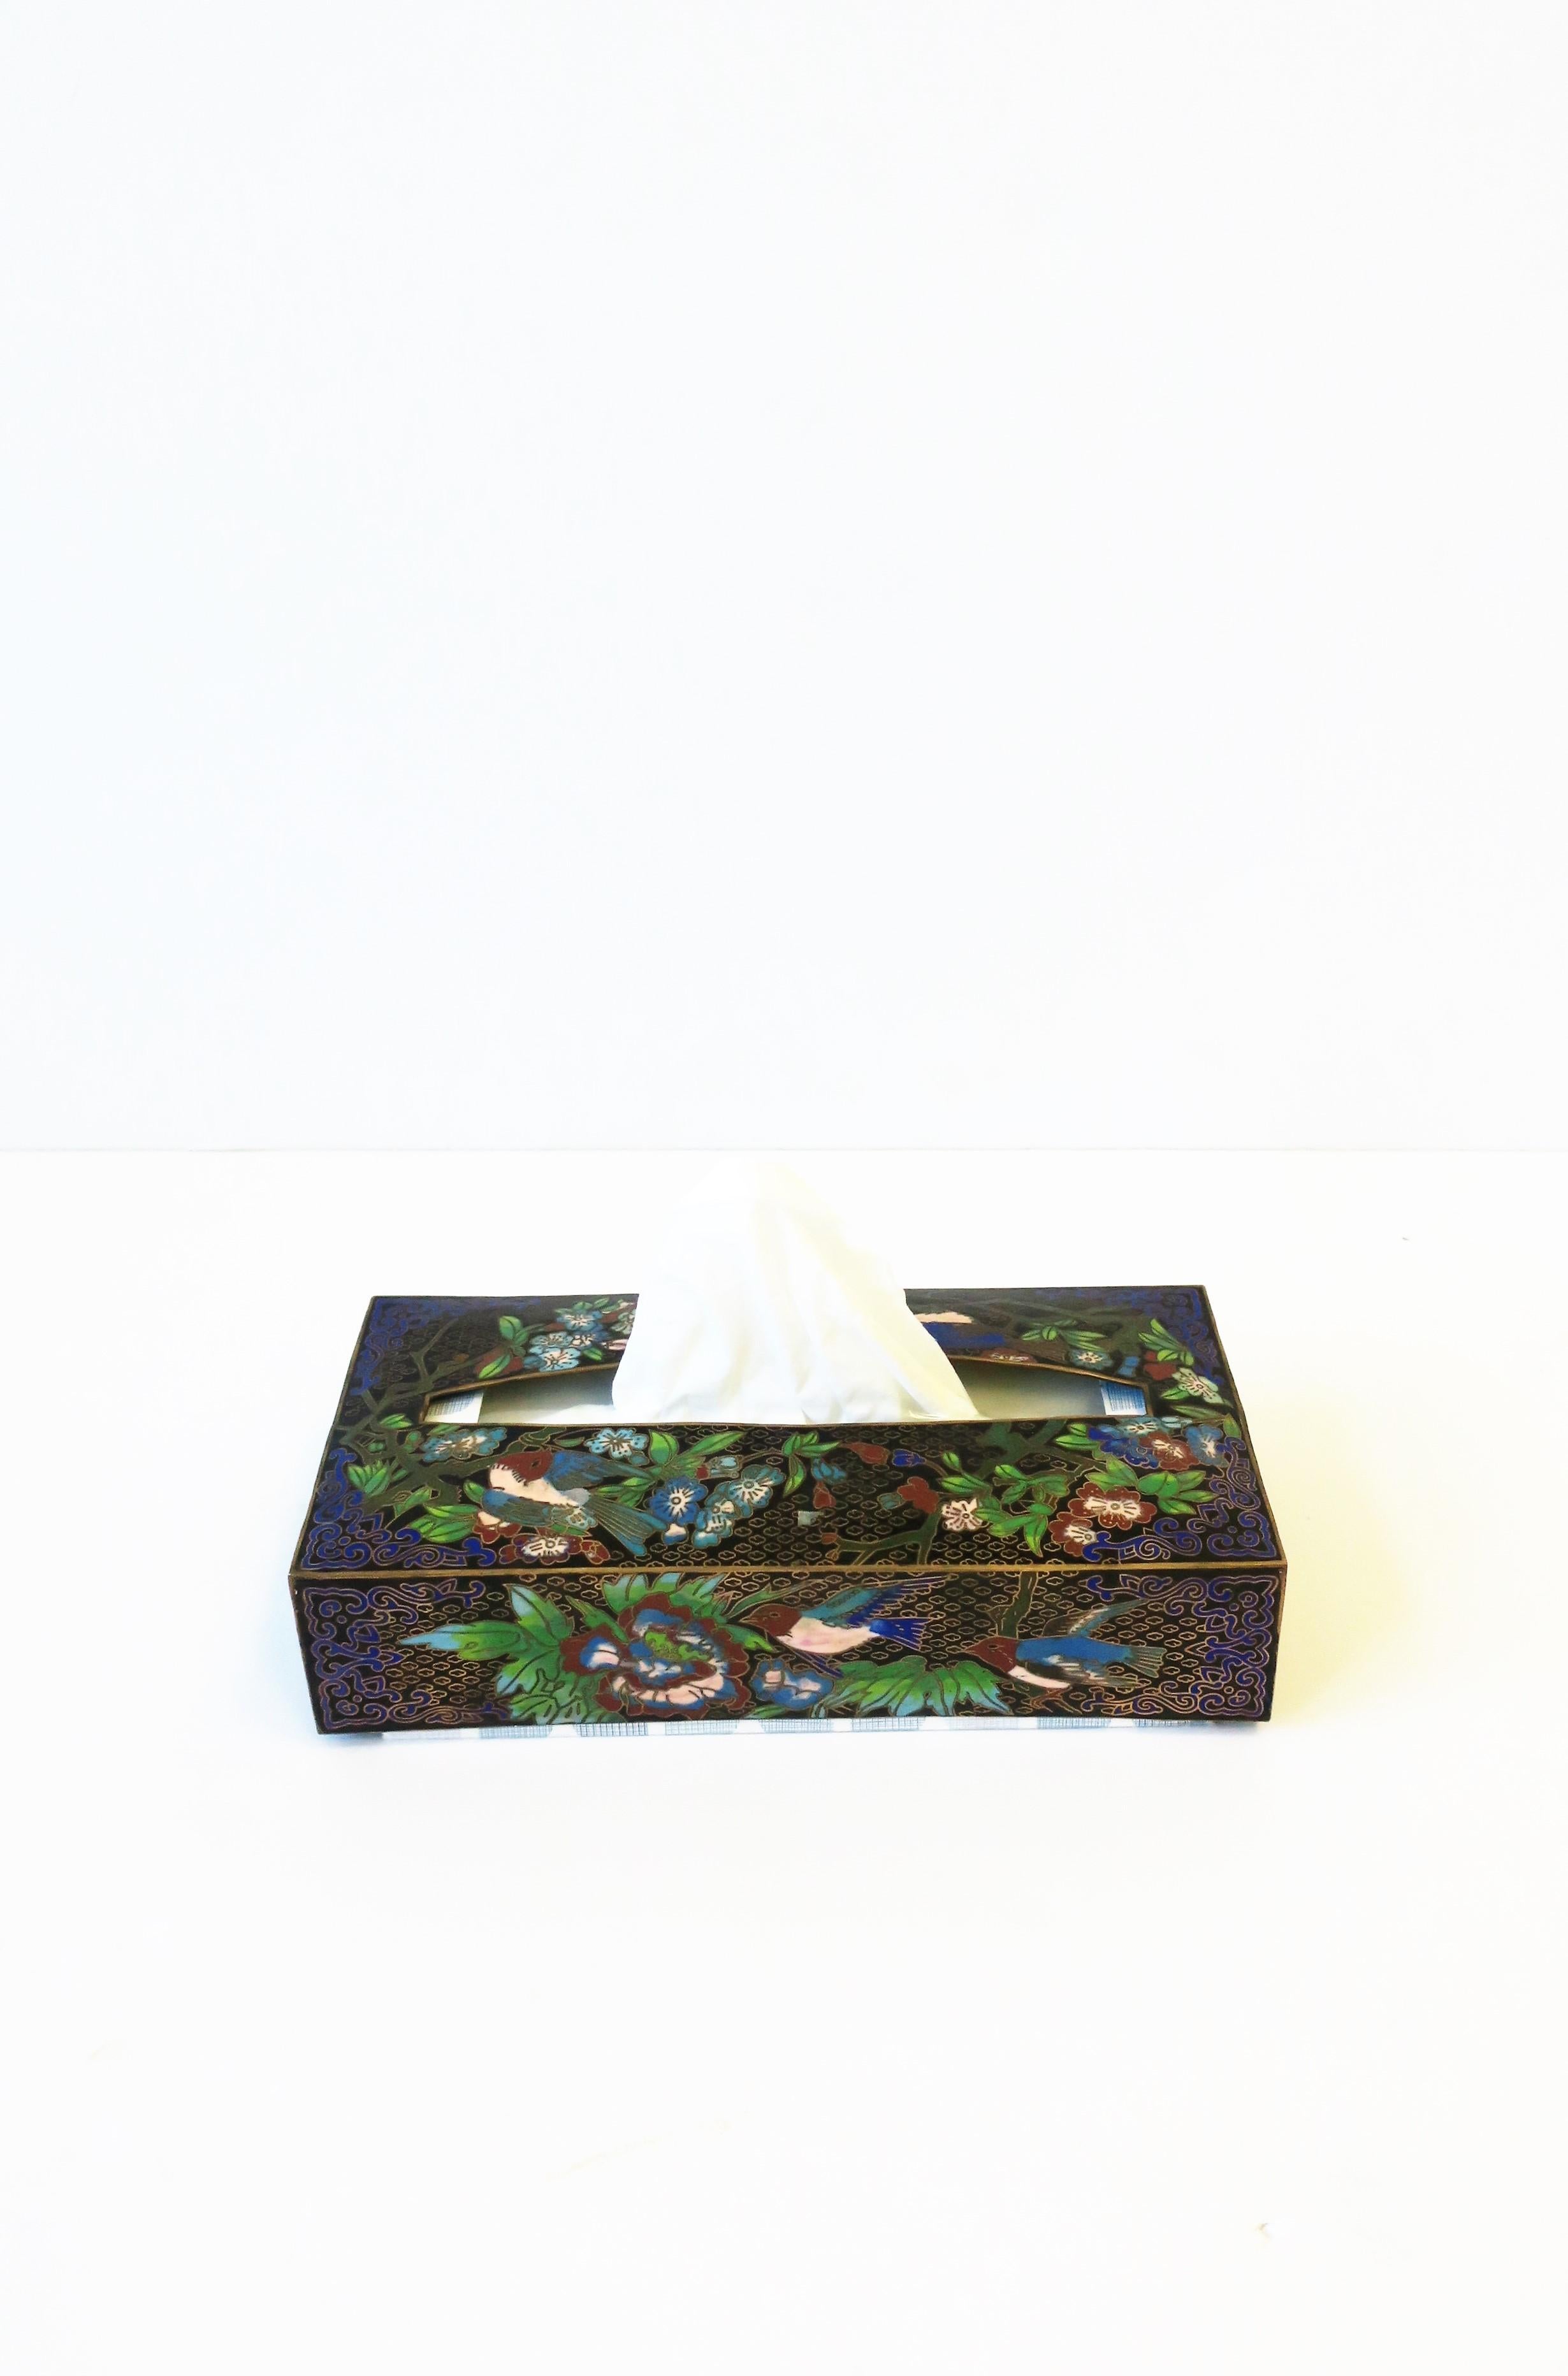 Brass and Cloisonné Enamel Tissue Box Holder Cover with Birds and Flowers 5